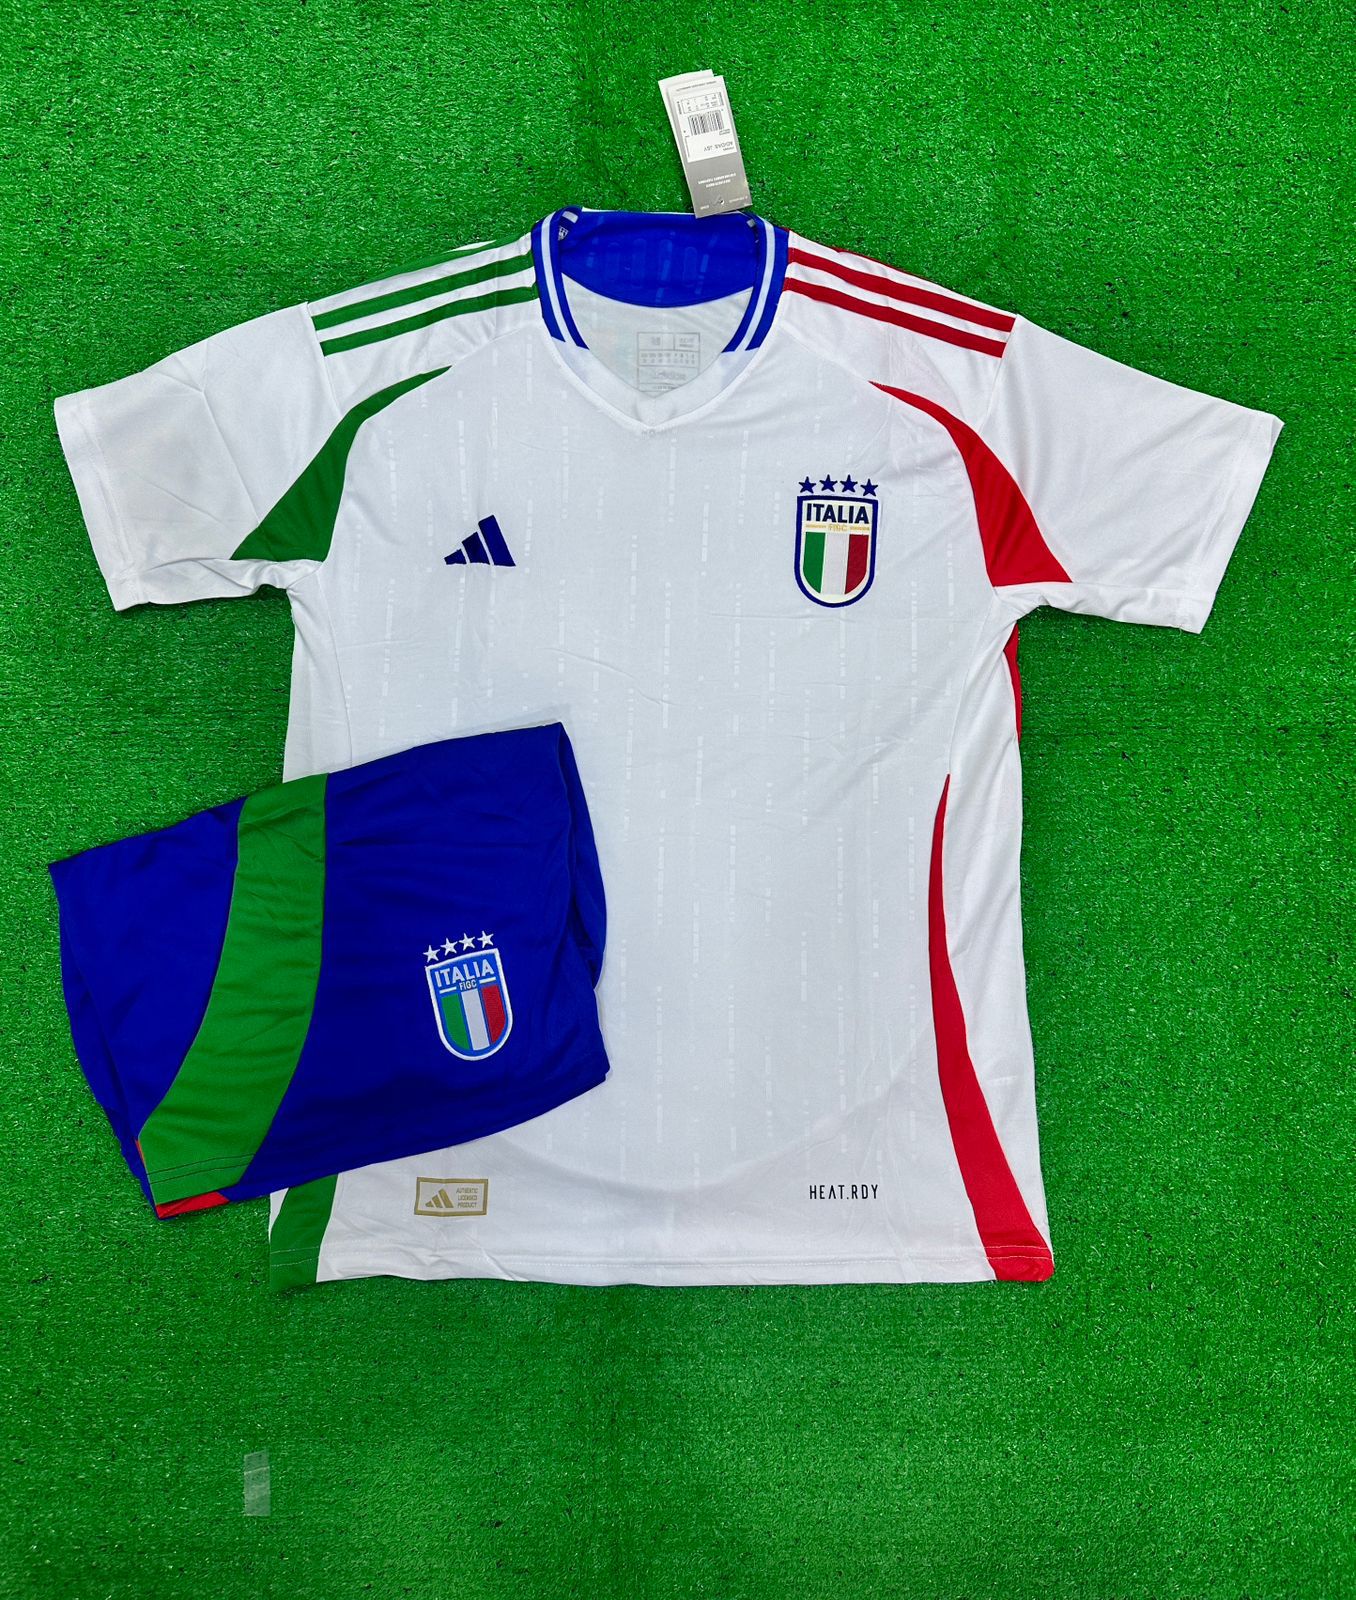 ITALY AWAY JERSEY WITH SHORTS